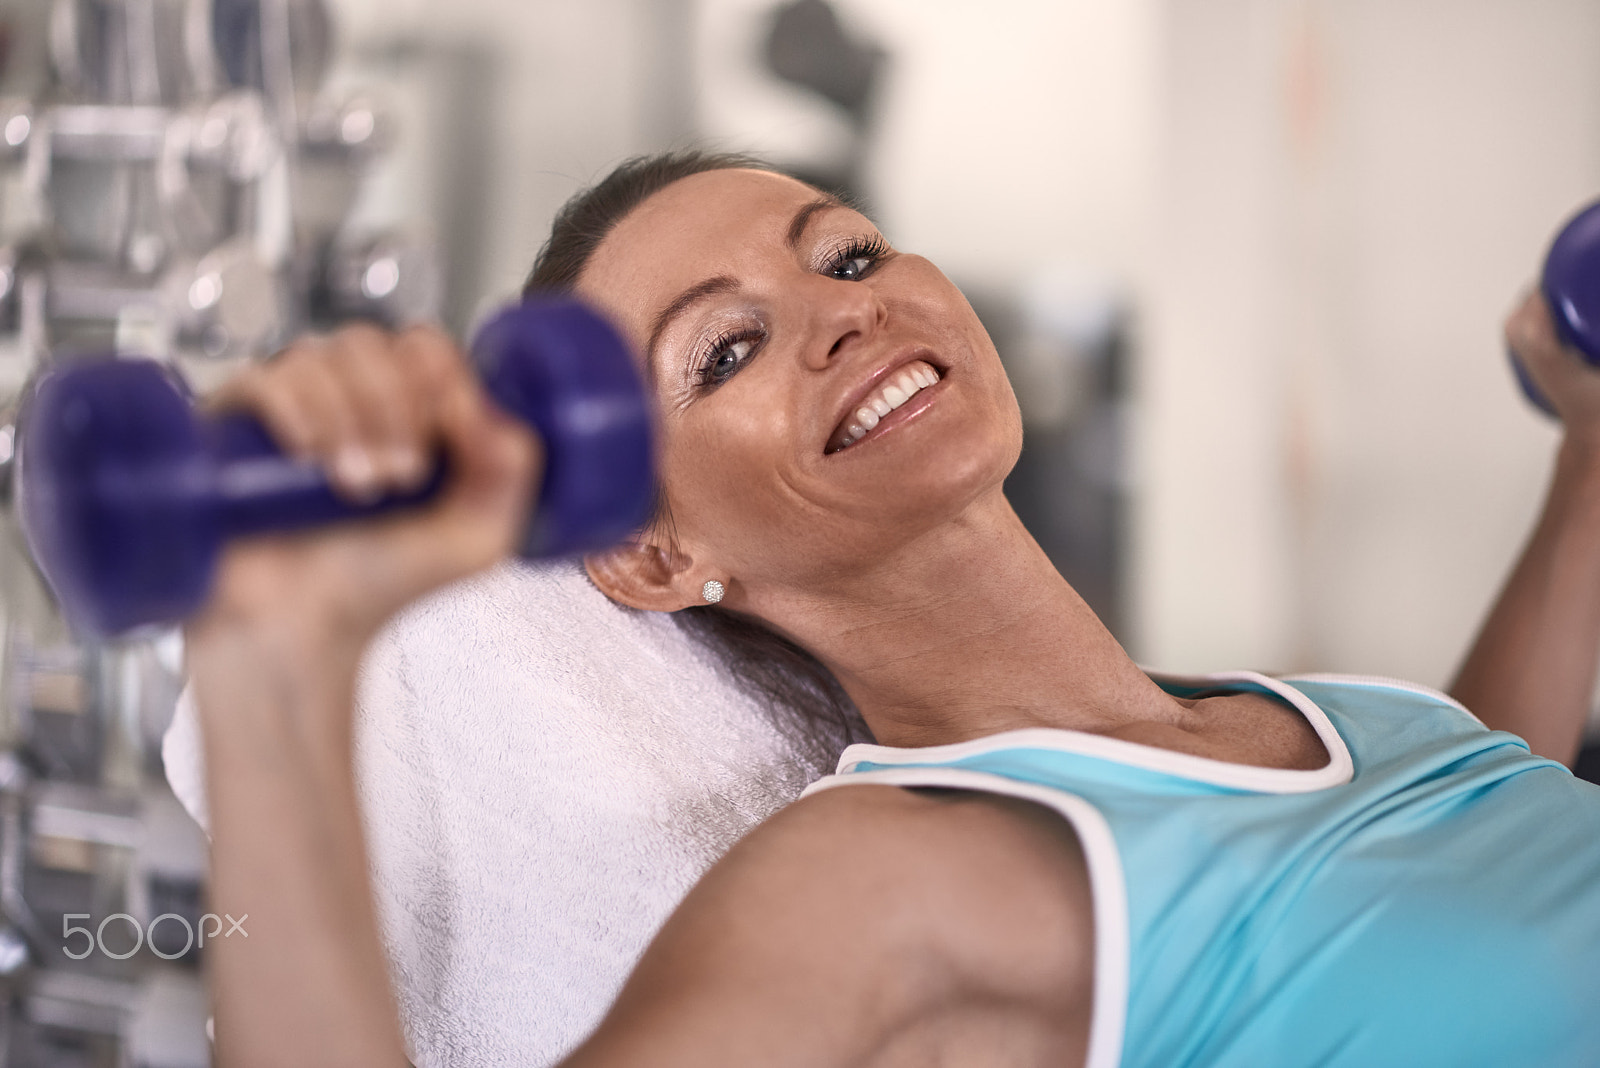 Nikon D800 sample photo. Attractive middle-aged woman working out in a gym photography